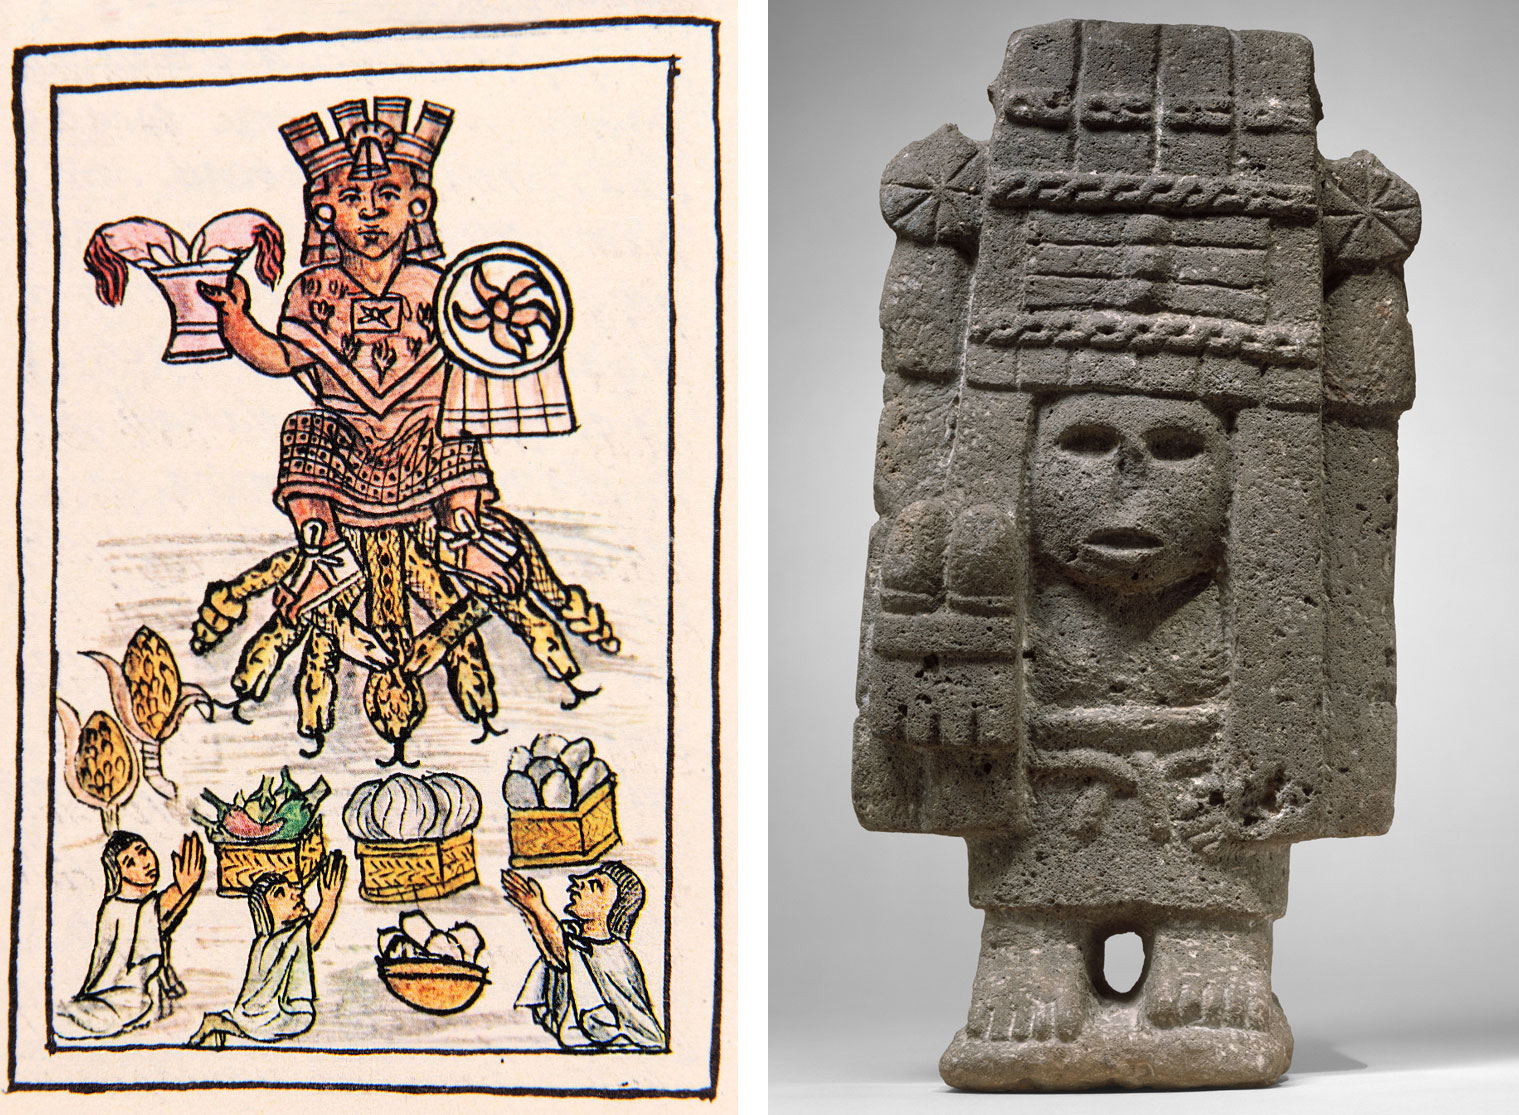 2-Panel images of the Aztec maize goddess Chicomecóatl or Seven Snake. Panel 1: Drawing of Chicomecóatl from the Florentine Codex. The drawing shows Chicomecóatl holding an urn with two ears of maize in her right hand and a shield in her left hand. She is sitting on seven snakes and people kneel in front of her and offer her food. Panel 2: A stone figure of Chicomecóatl wearing a rectangular headdress and holding two ears of maize in her right hand.